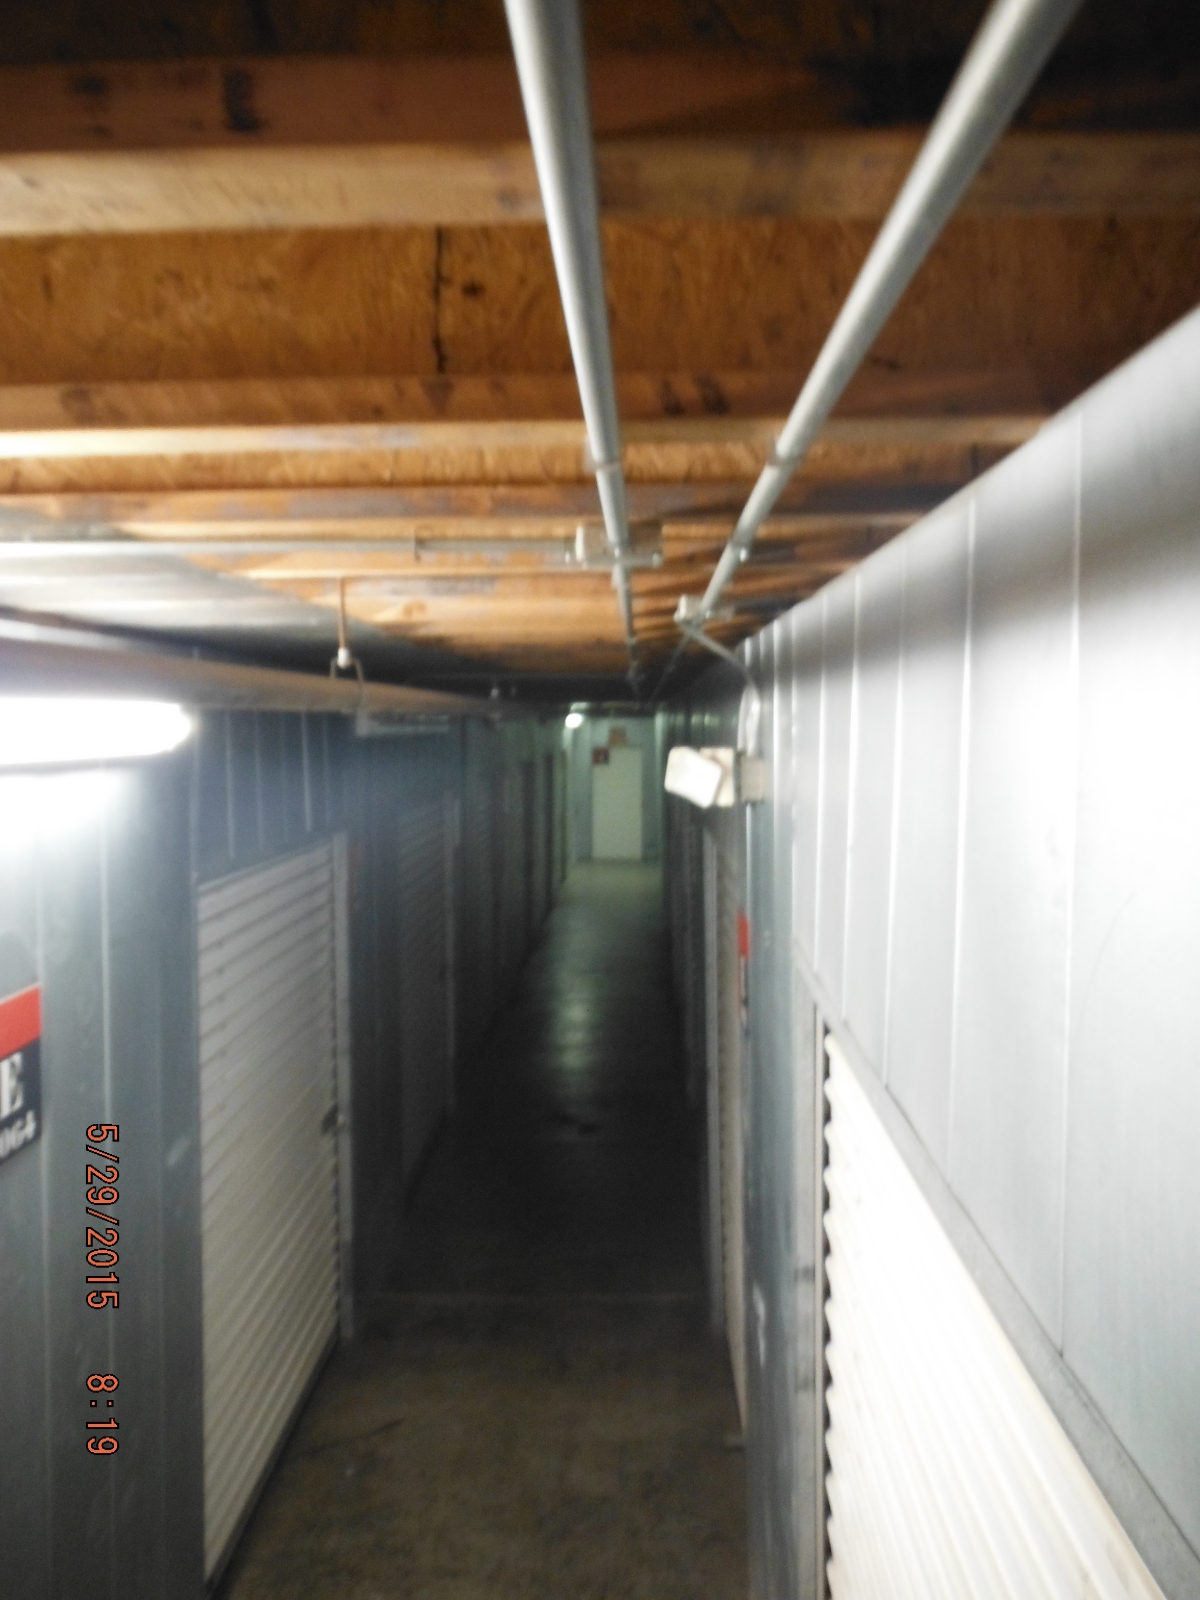 HOW THIEVES CAN ENTER/EXIT LOCKED INSIDE STORAGE UNITS (inside buildings)